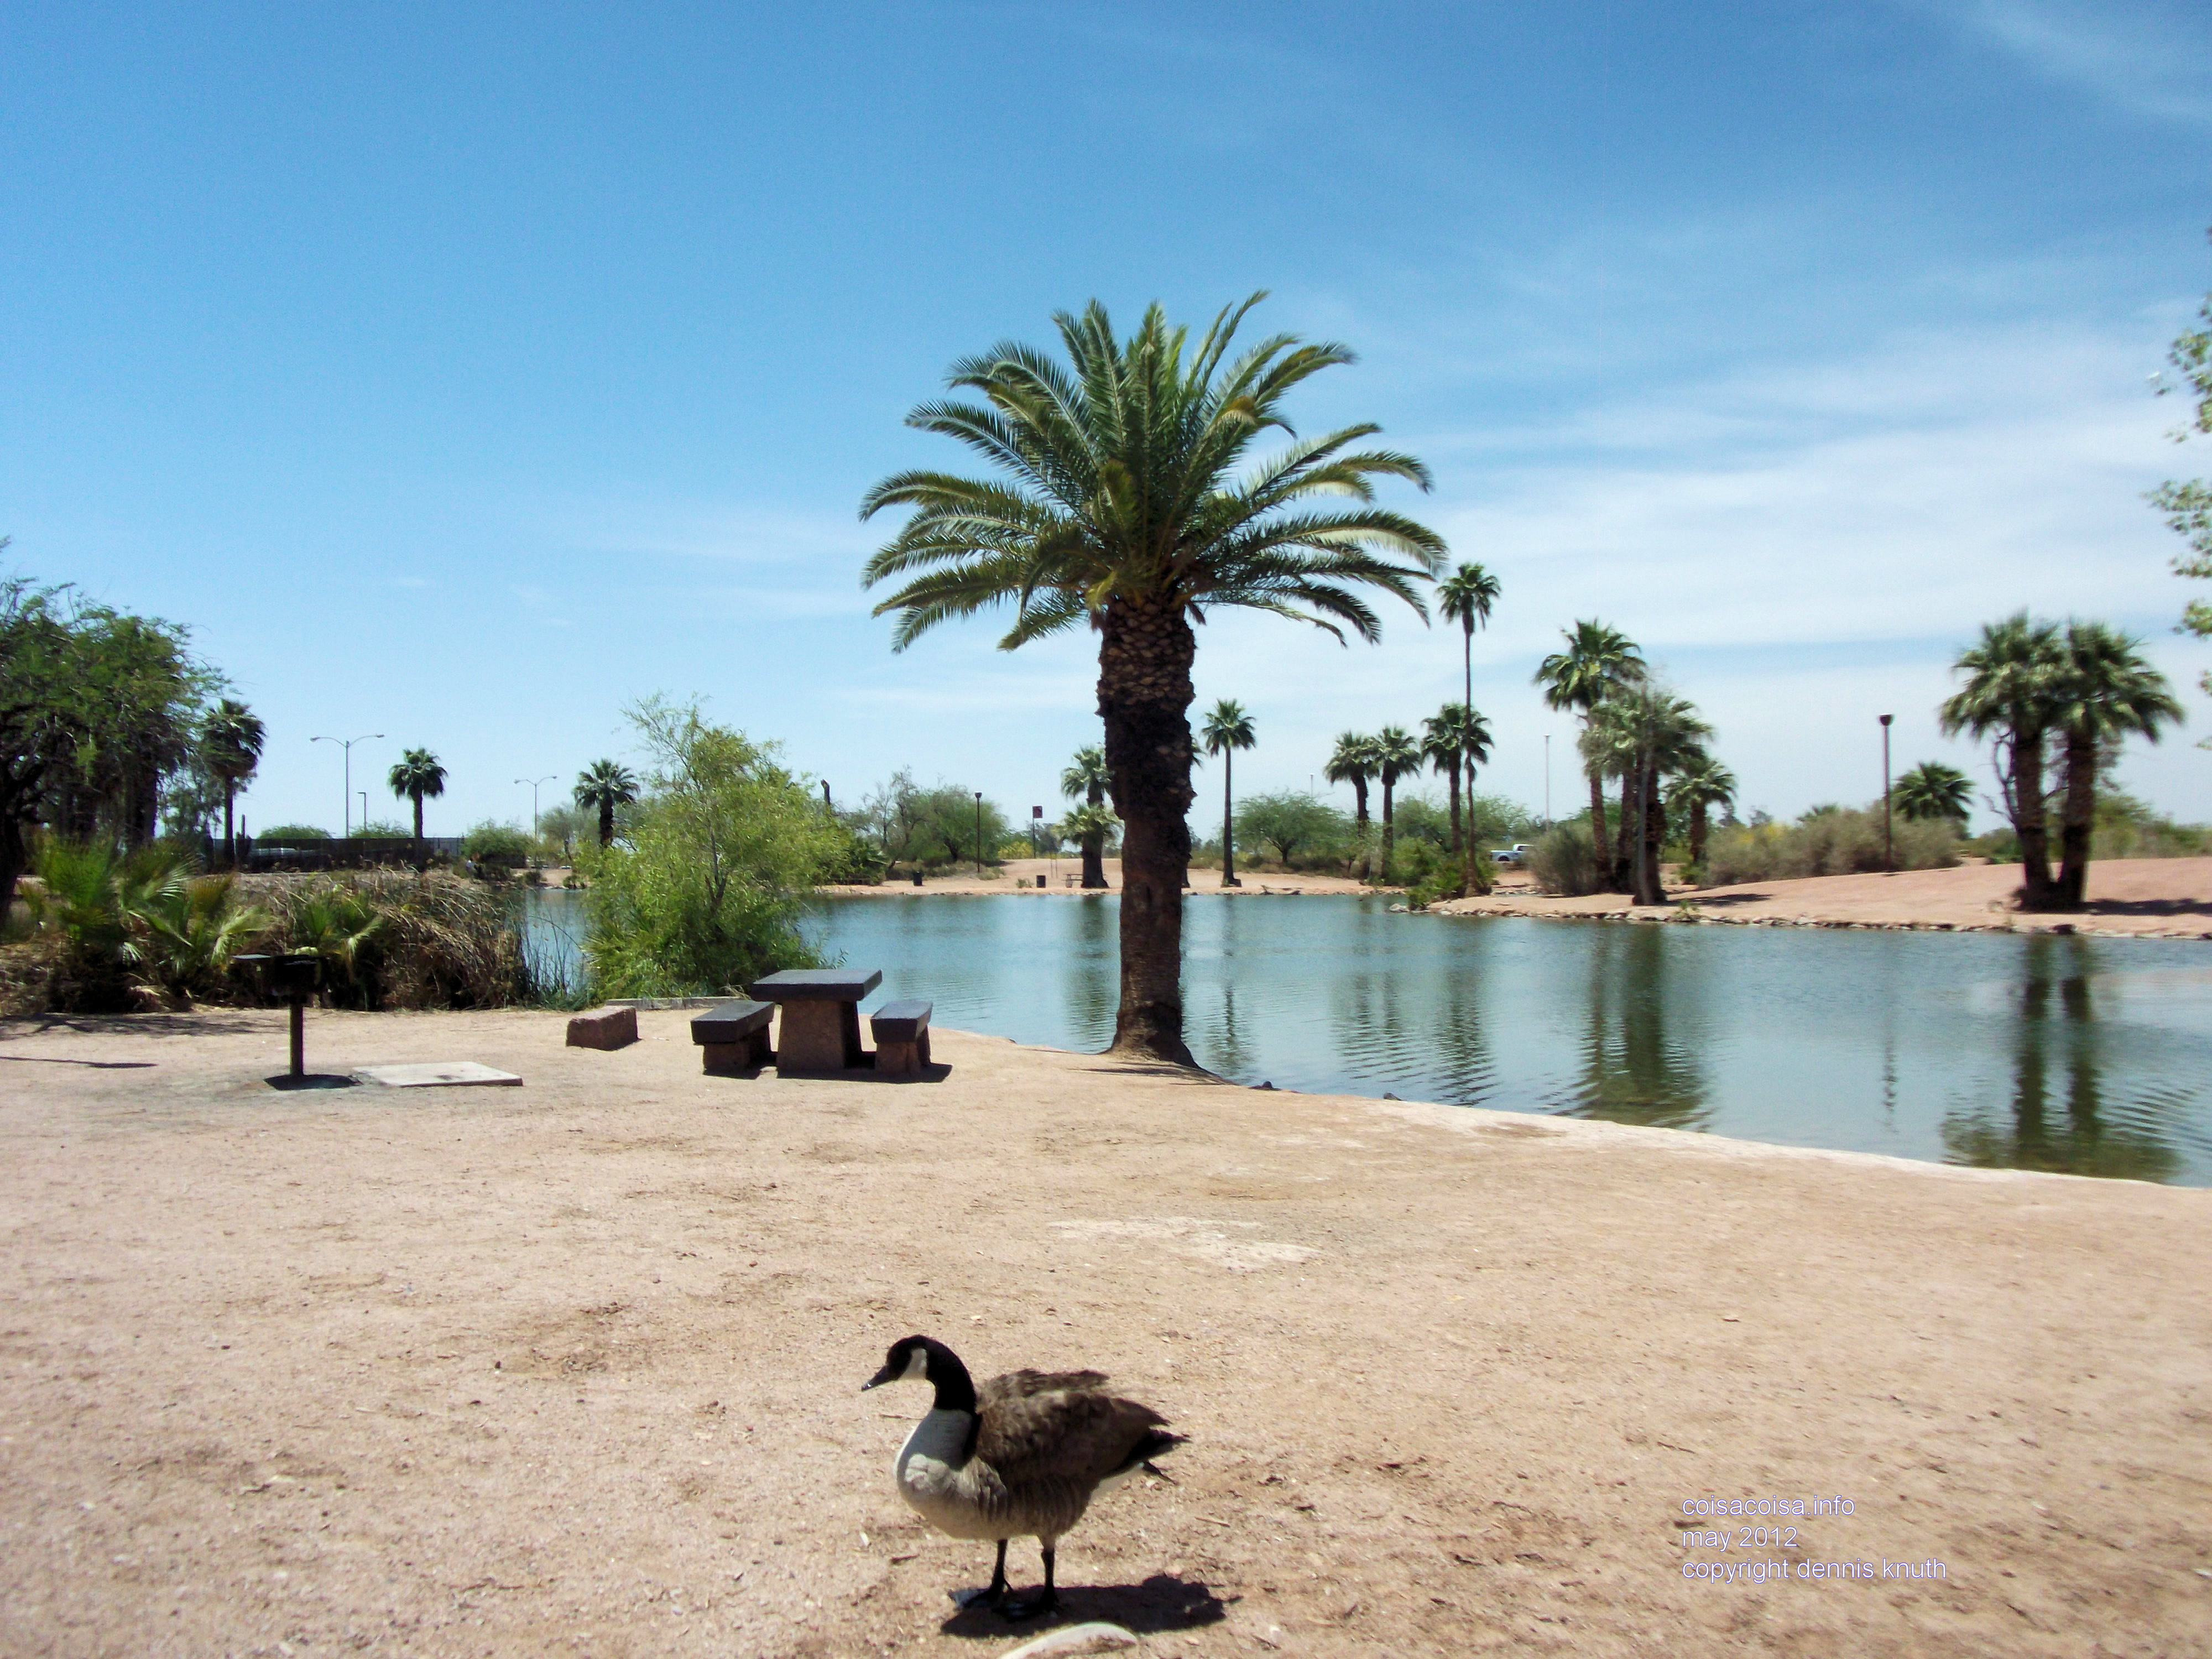 Goose and Palm in Papago Park